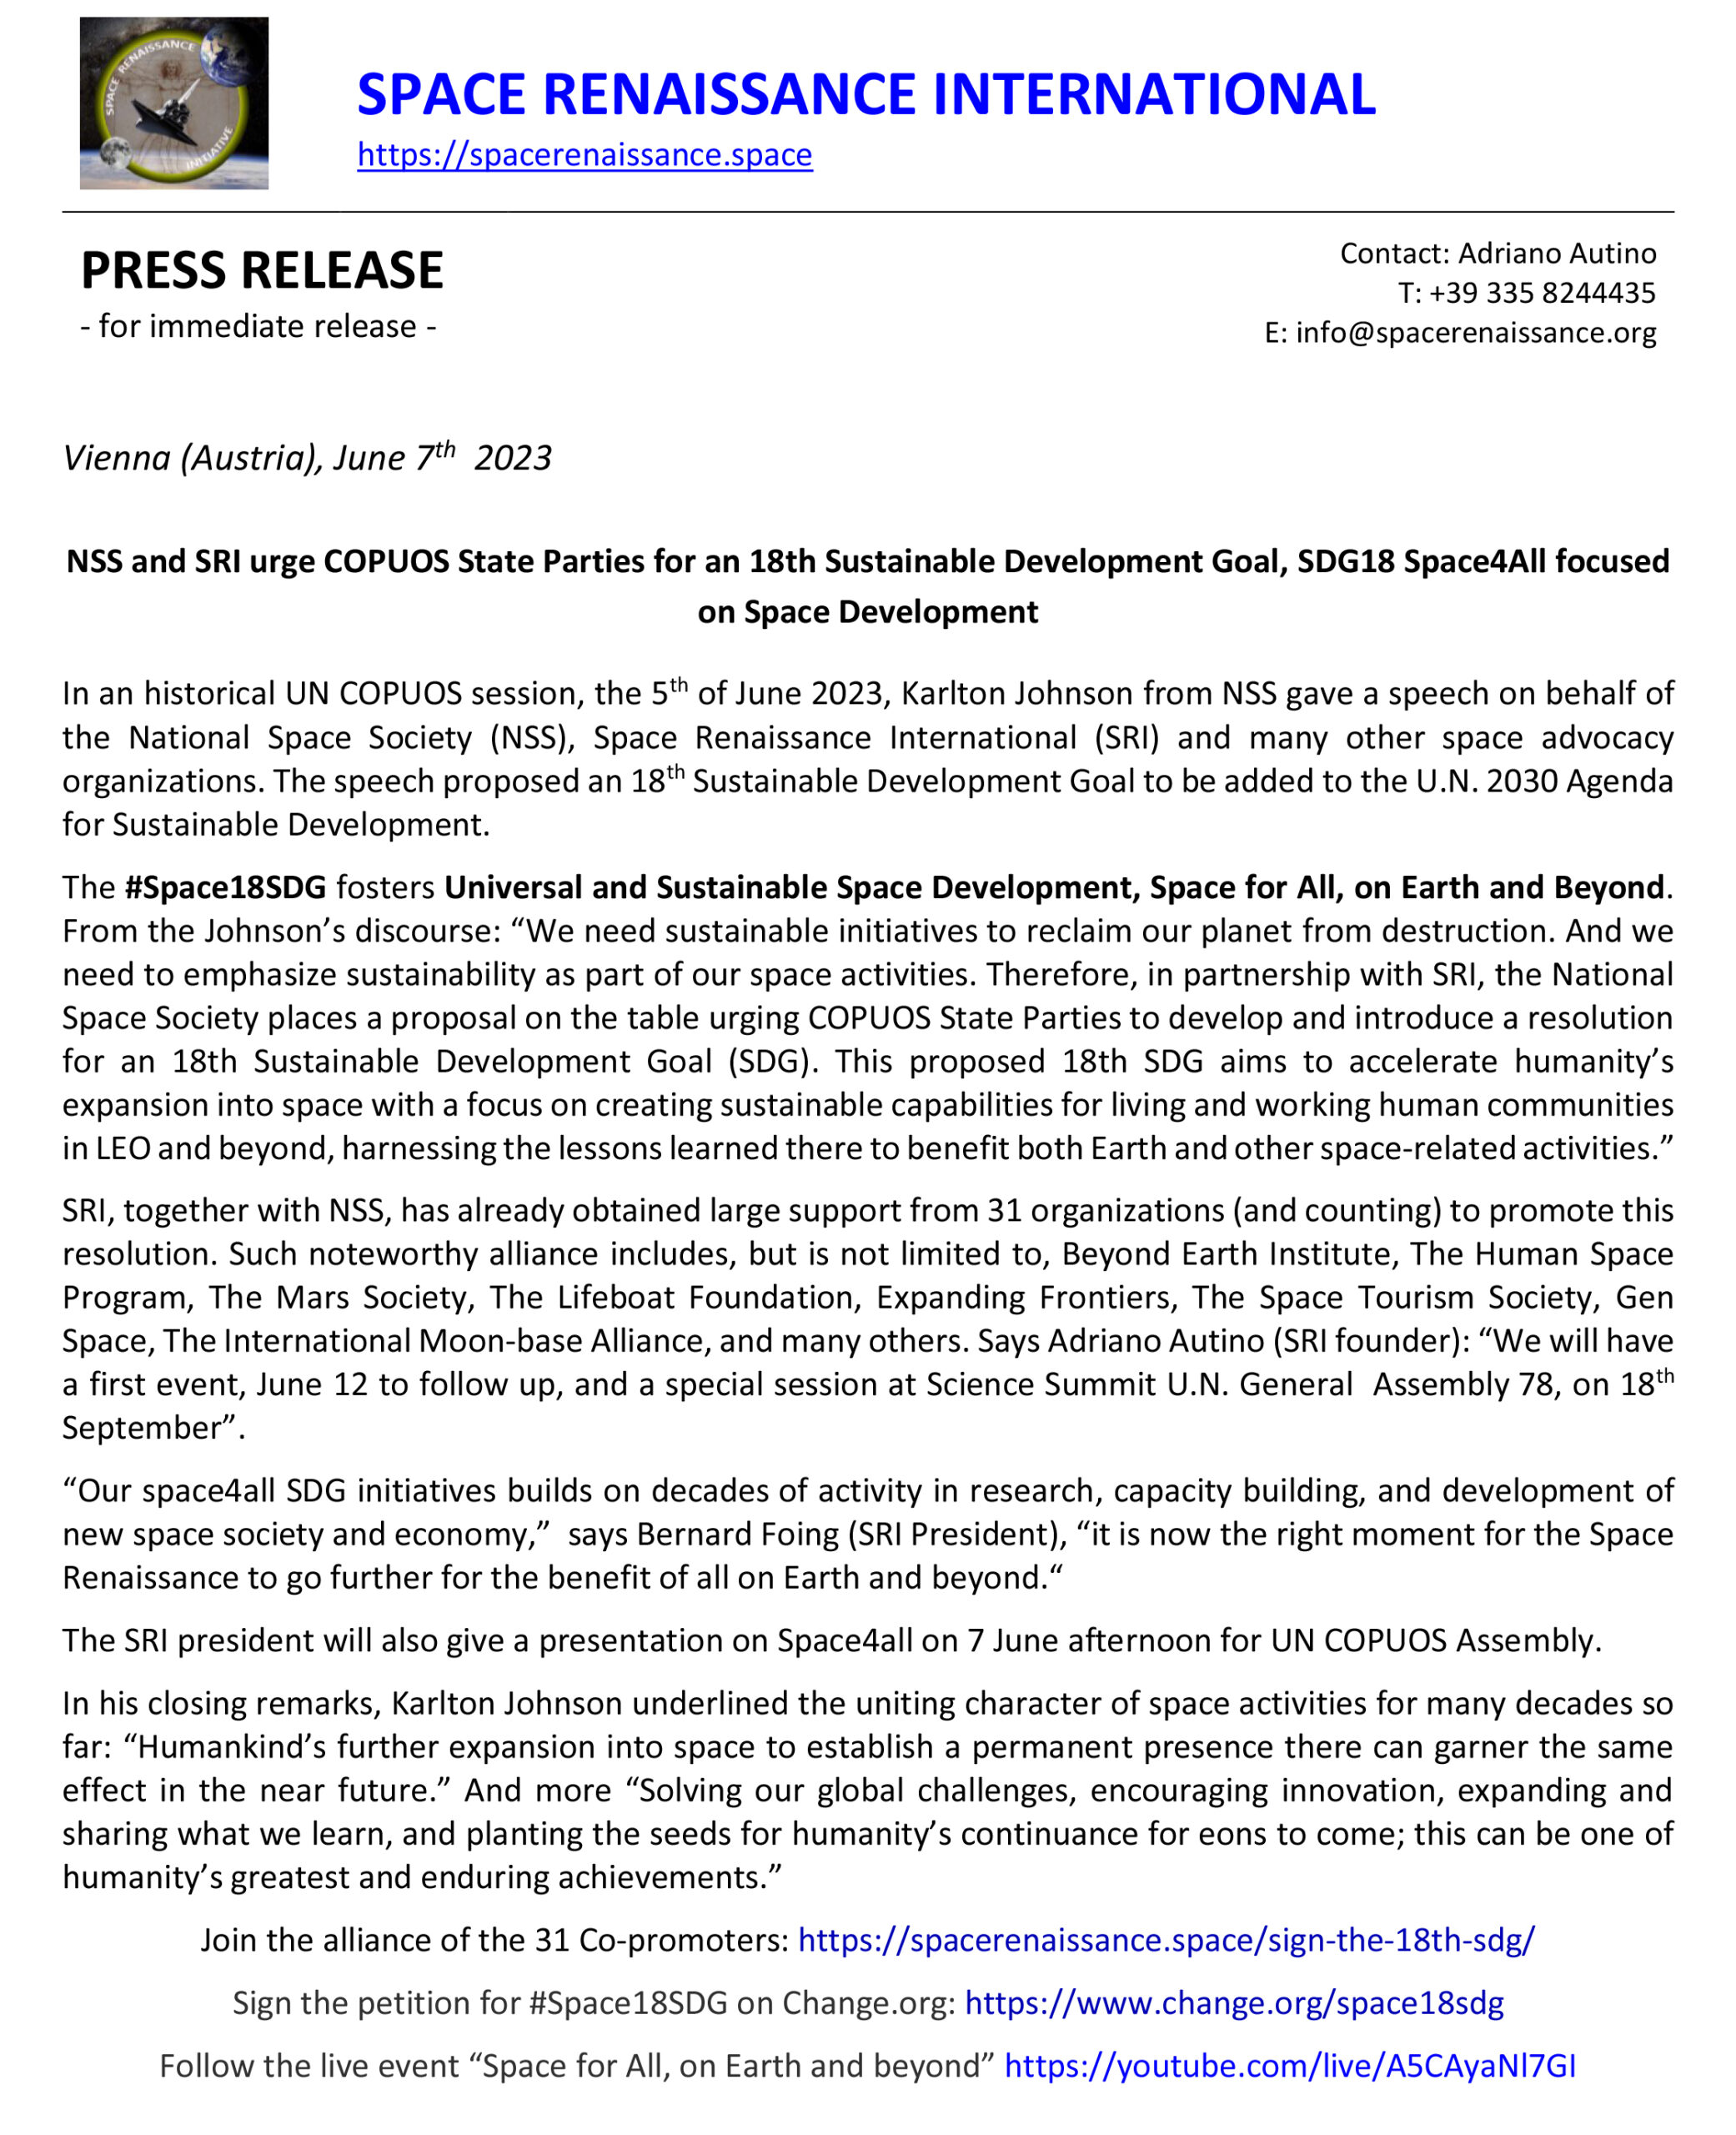 PRESS RELEASE:  NSS and SRI urge COPUOS State Parties for an 18th Sustainable Development Goal, SDG18 Space4All focused on Space Development